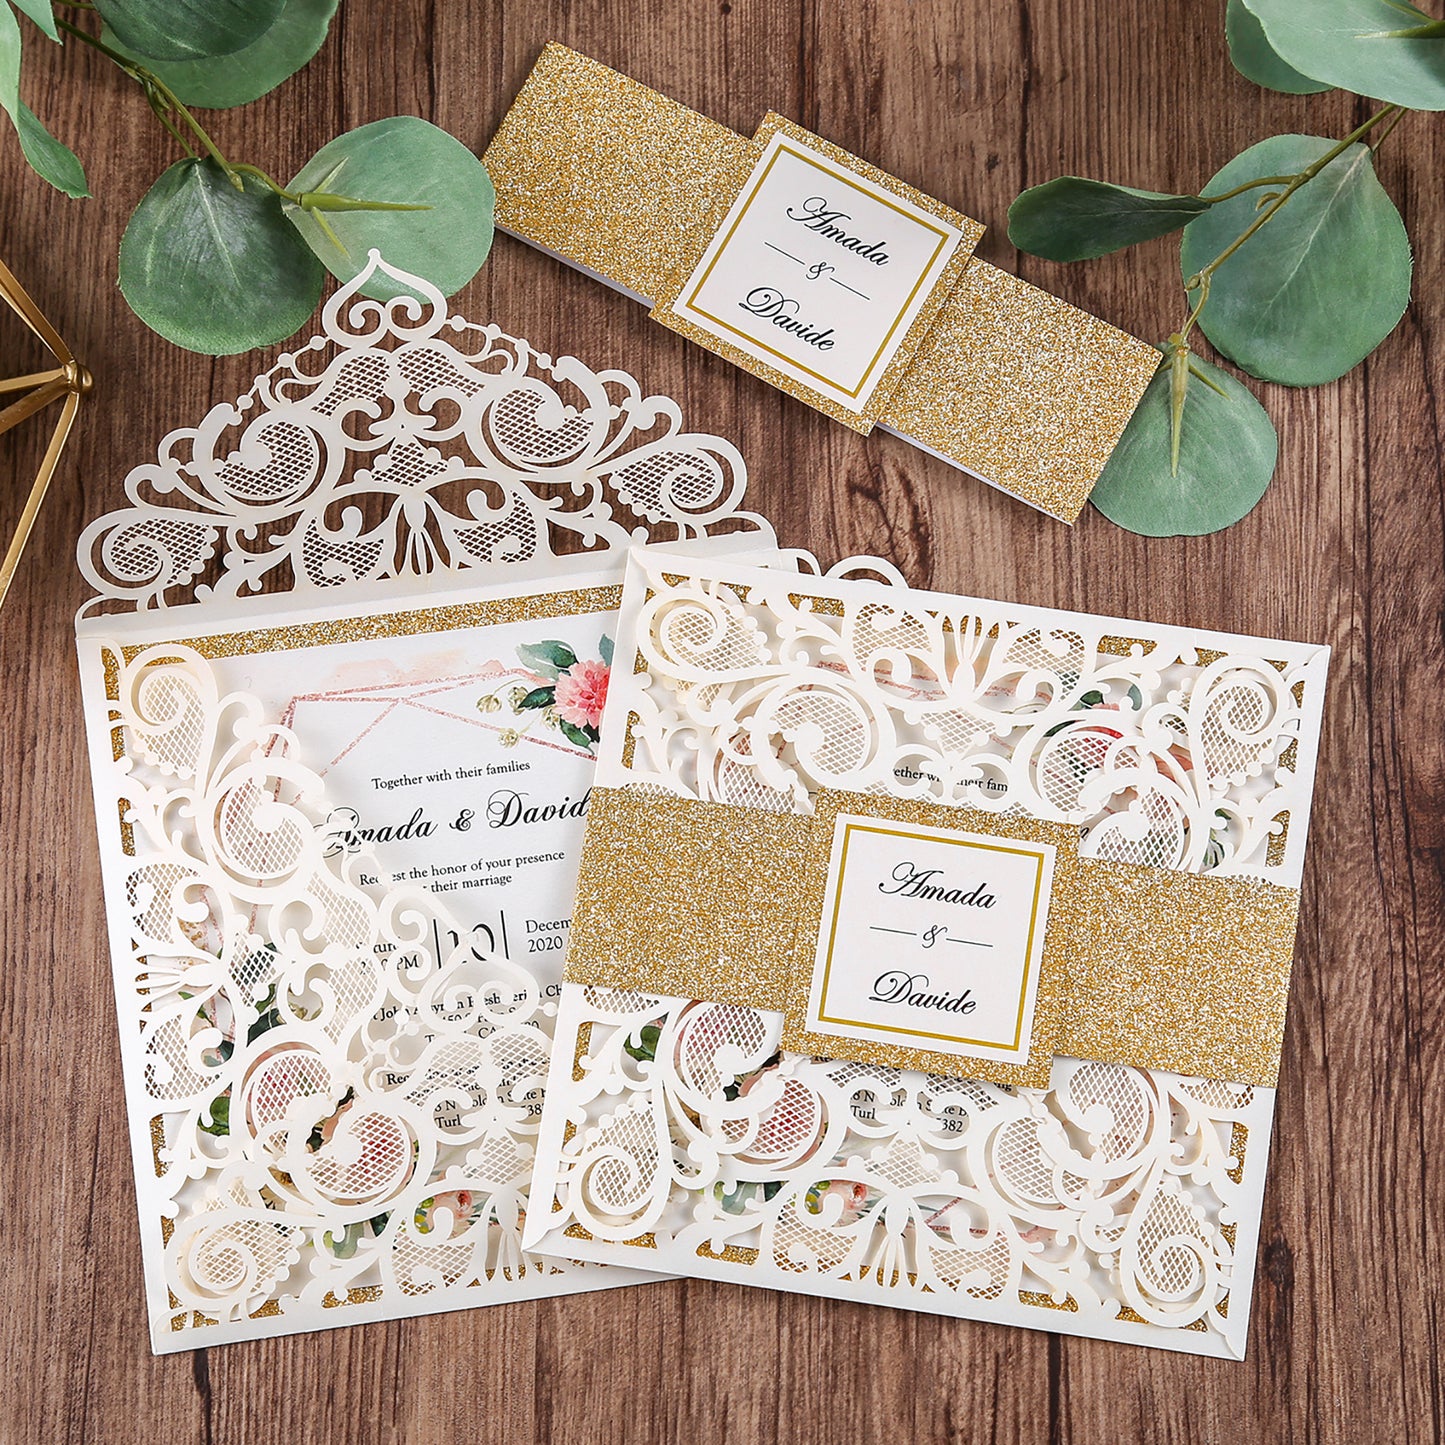 Square Ivory Wedding Invitations with Gold Glitter Border with Gold Band for Wedding, Bridal Shower, Dinner, Party